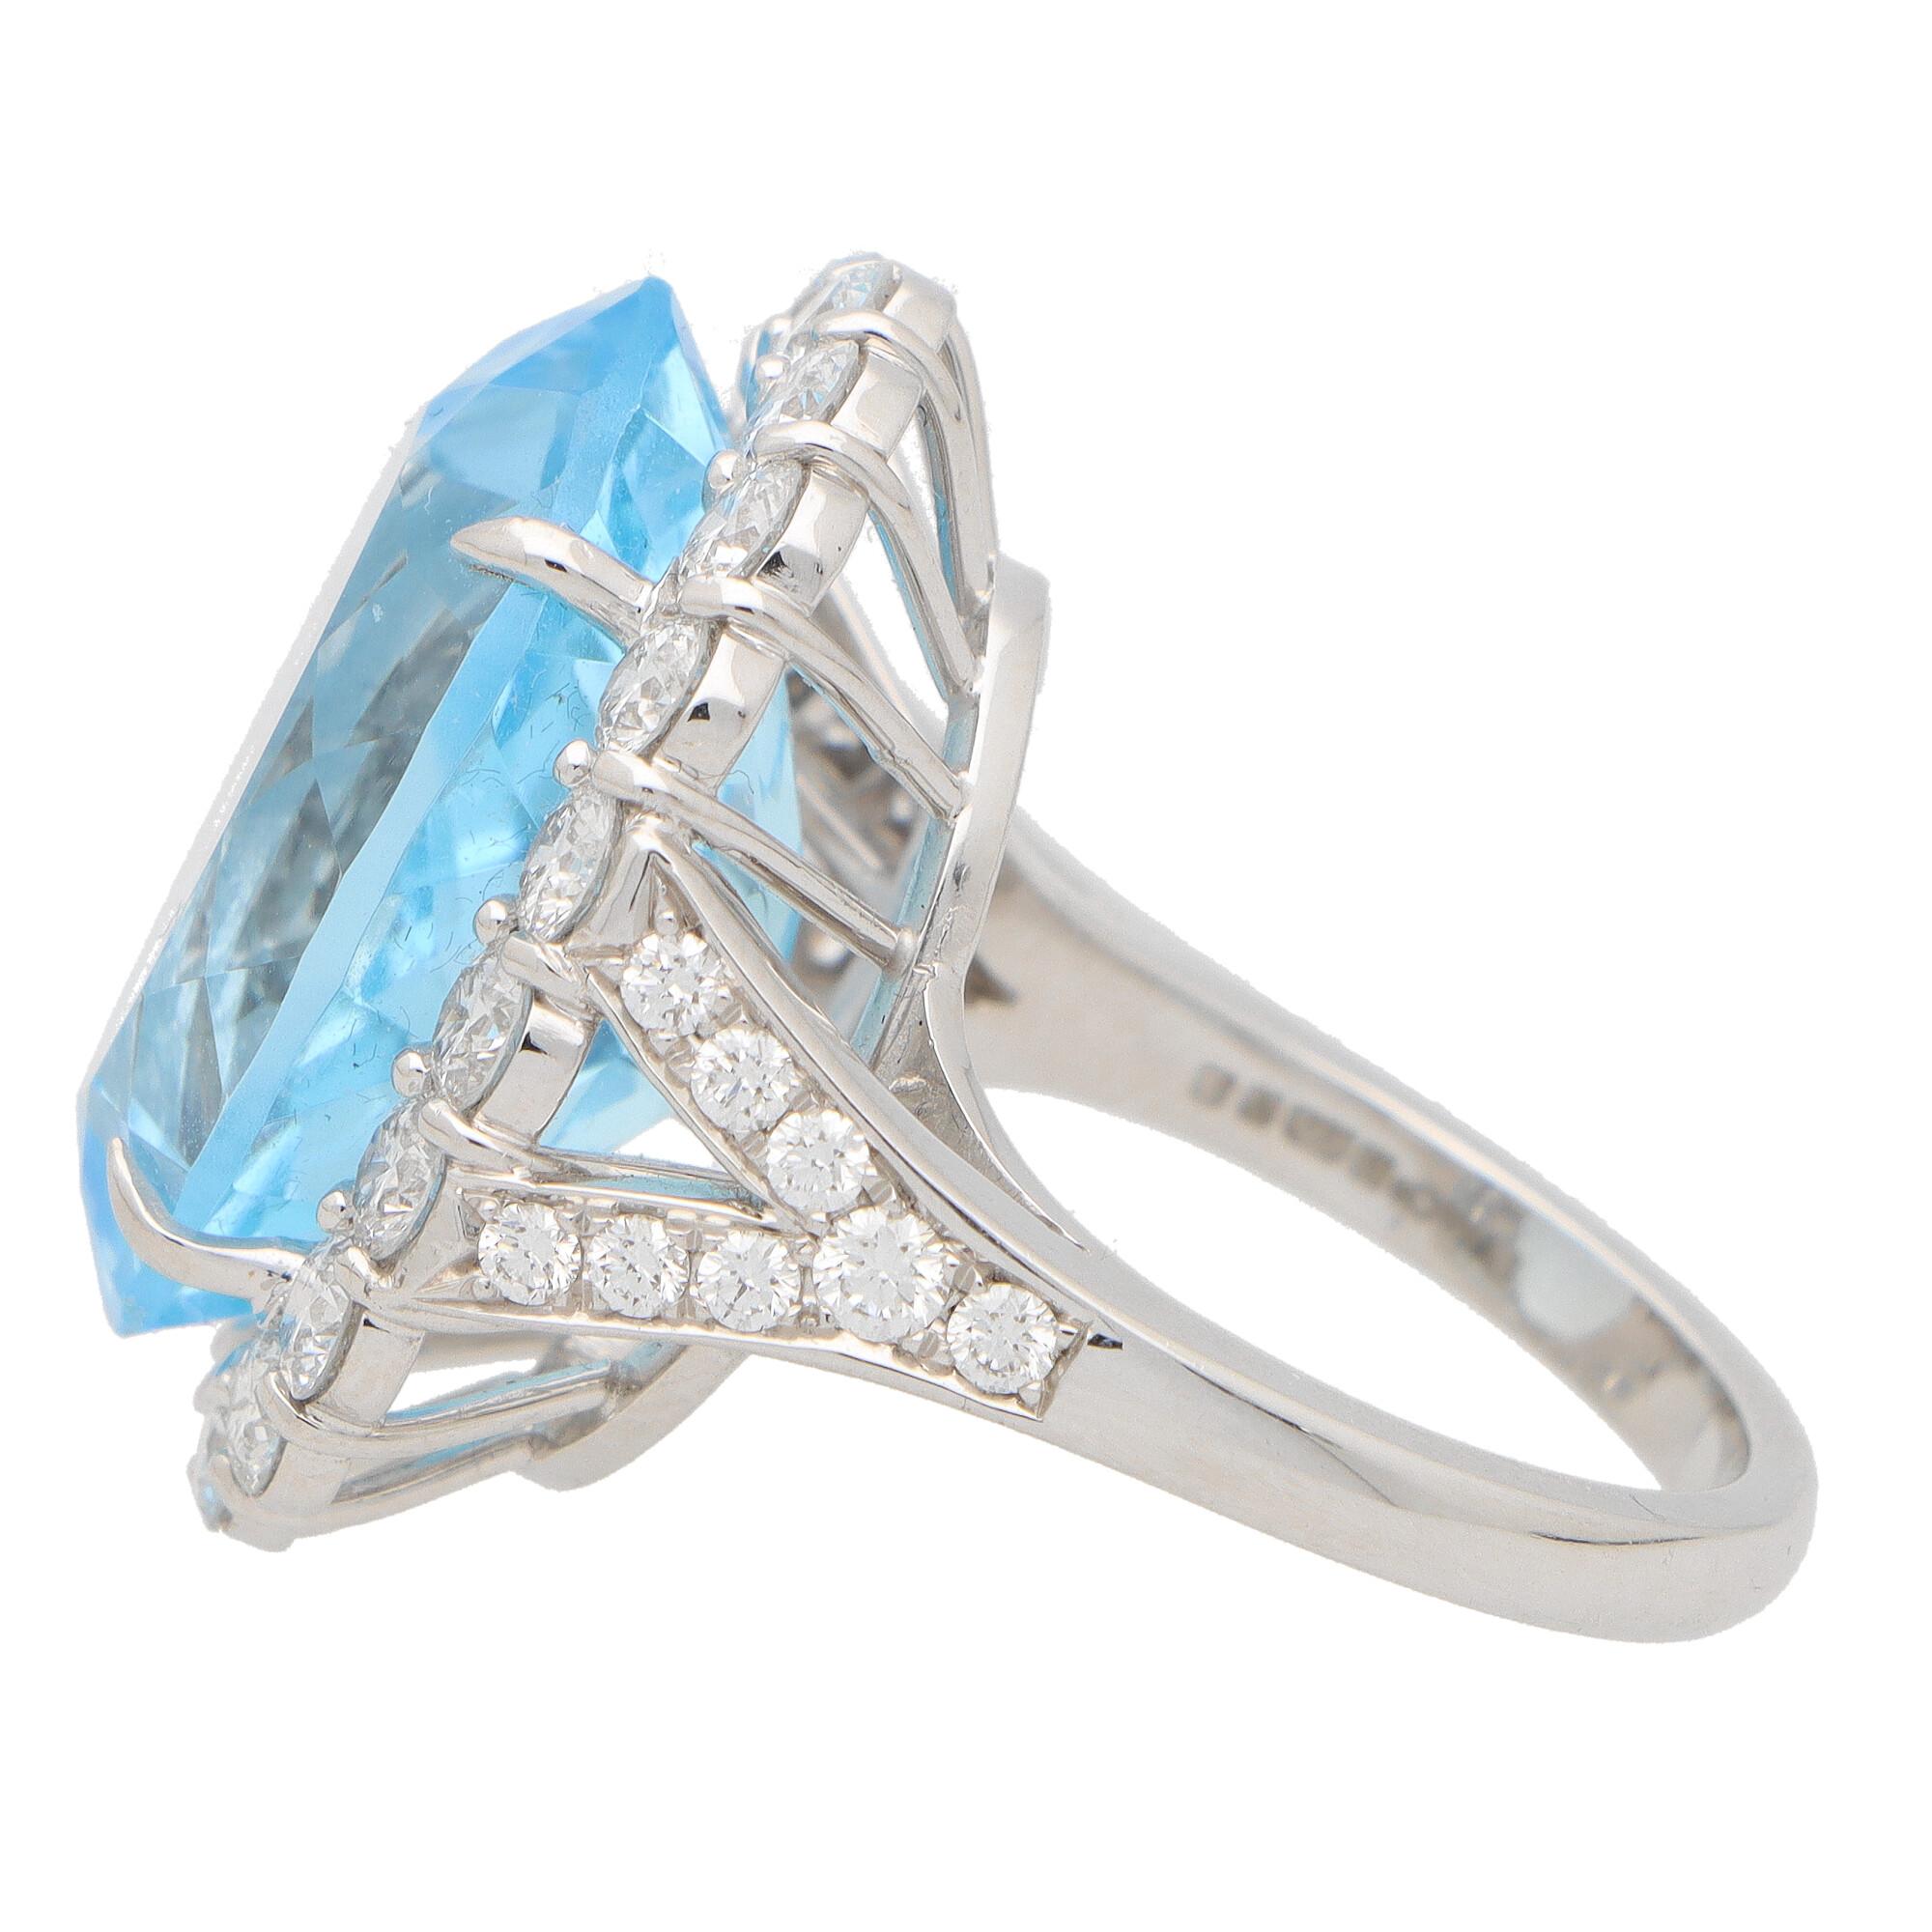 Oval Cut Blue Topaz and Diamond Cluster Cocktail Ring Set in Platinum